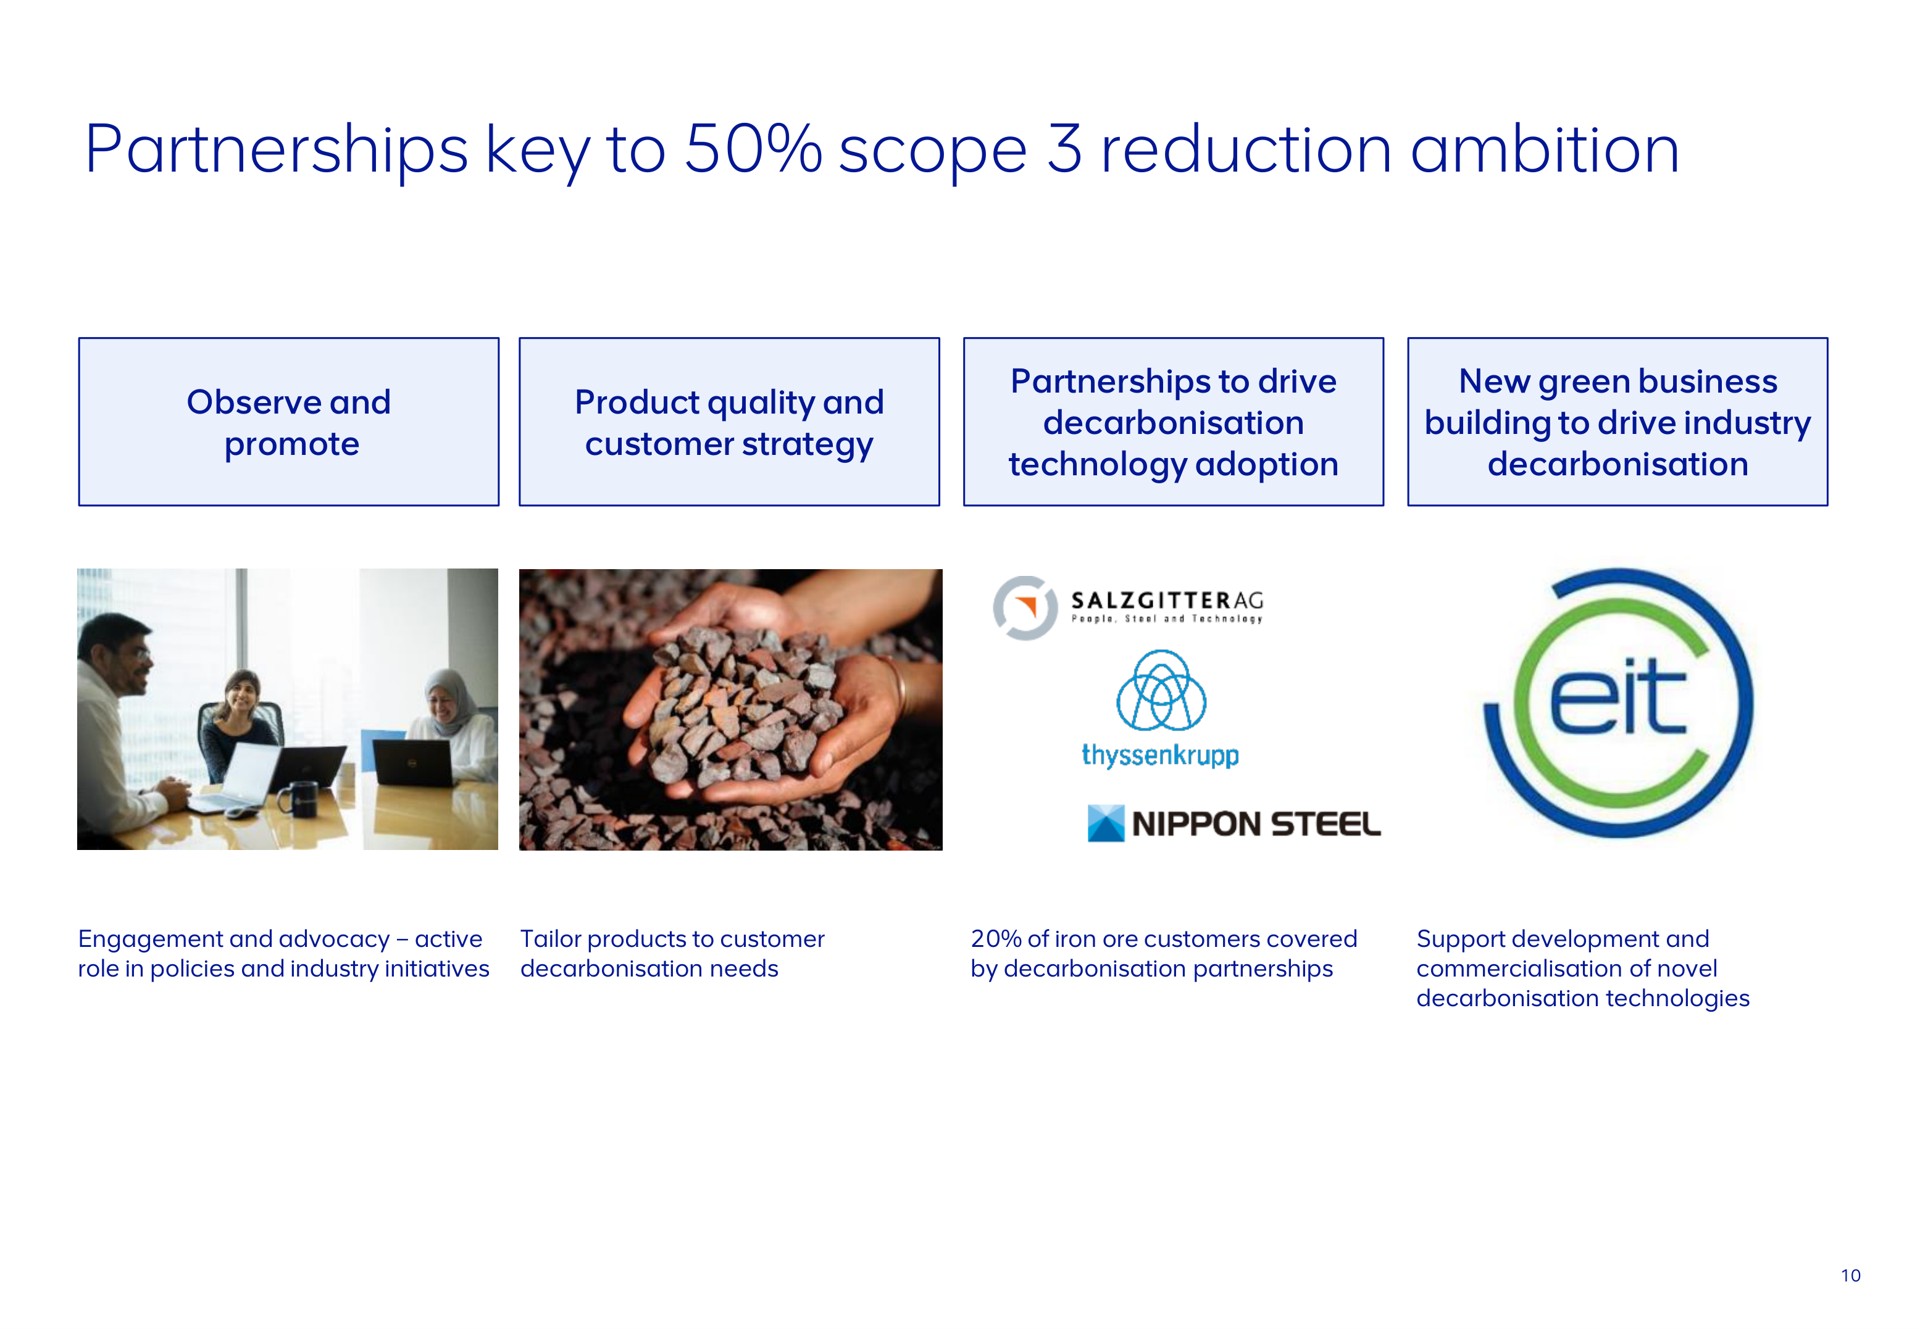 partnerships key to scope reduction ambition | AngloAmerican